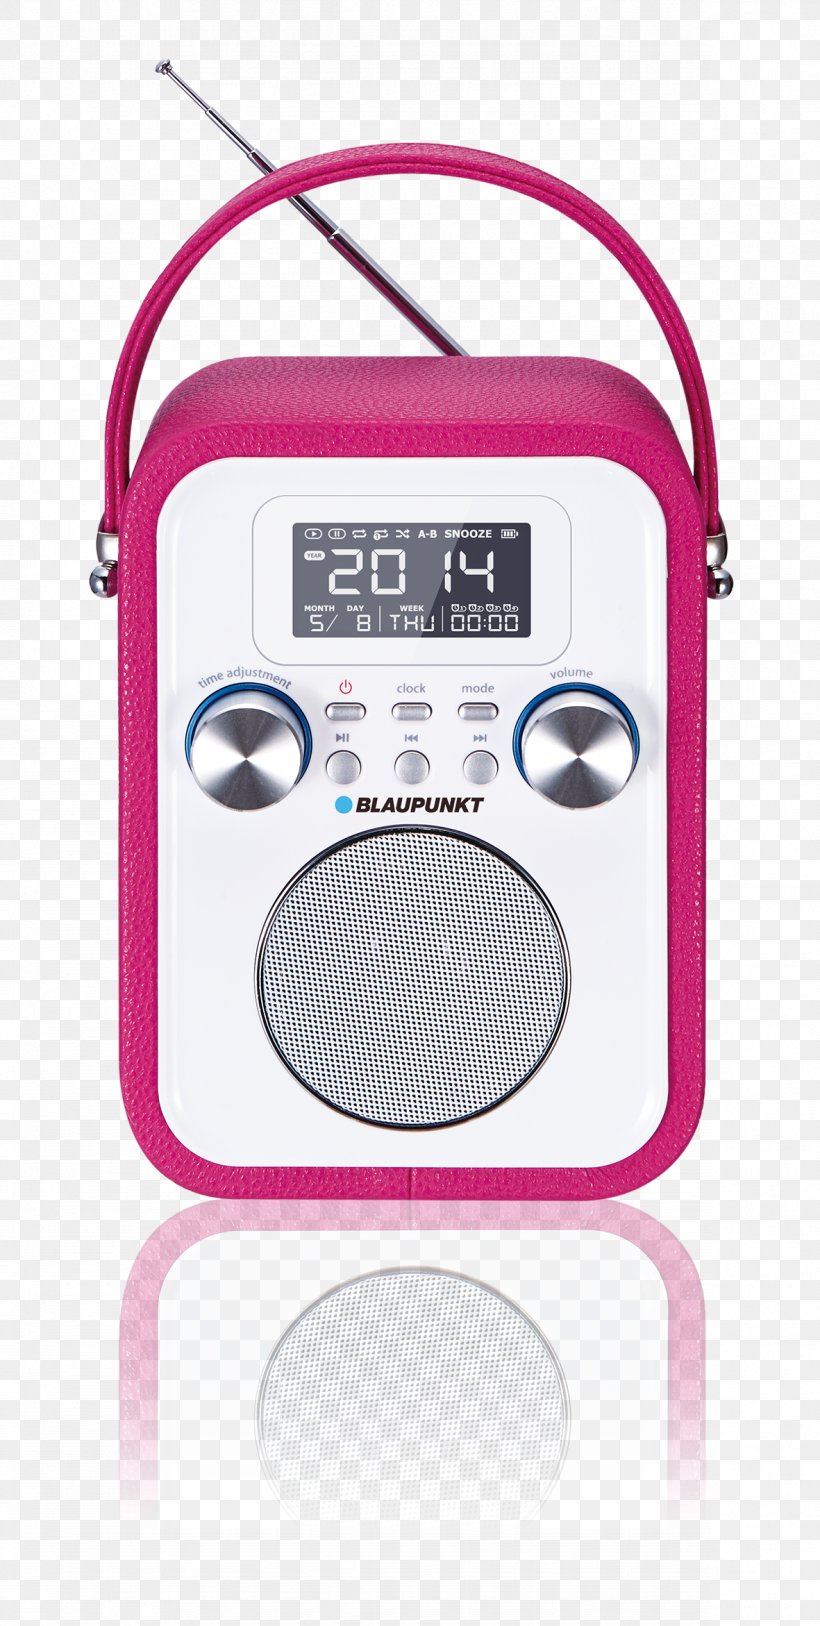 Blaupunkt Pp20bl Radio FM Broadcasting Frequency Modulation, PNG, 1181x2342px, Blaupunkt, Audio, Communication Device, Digital Radio, Electronic Device Download Free